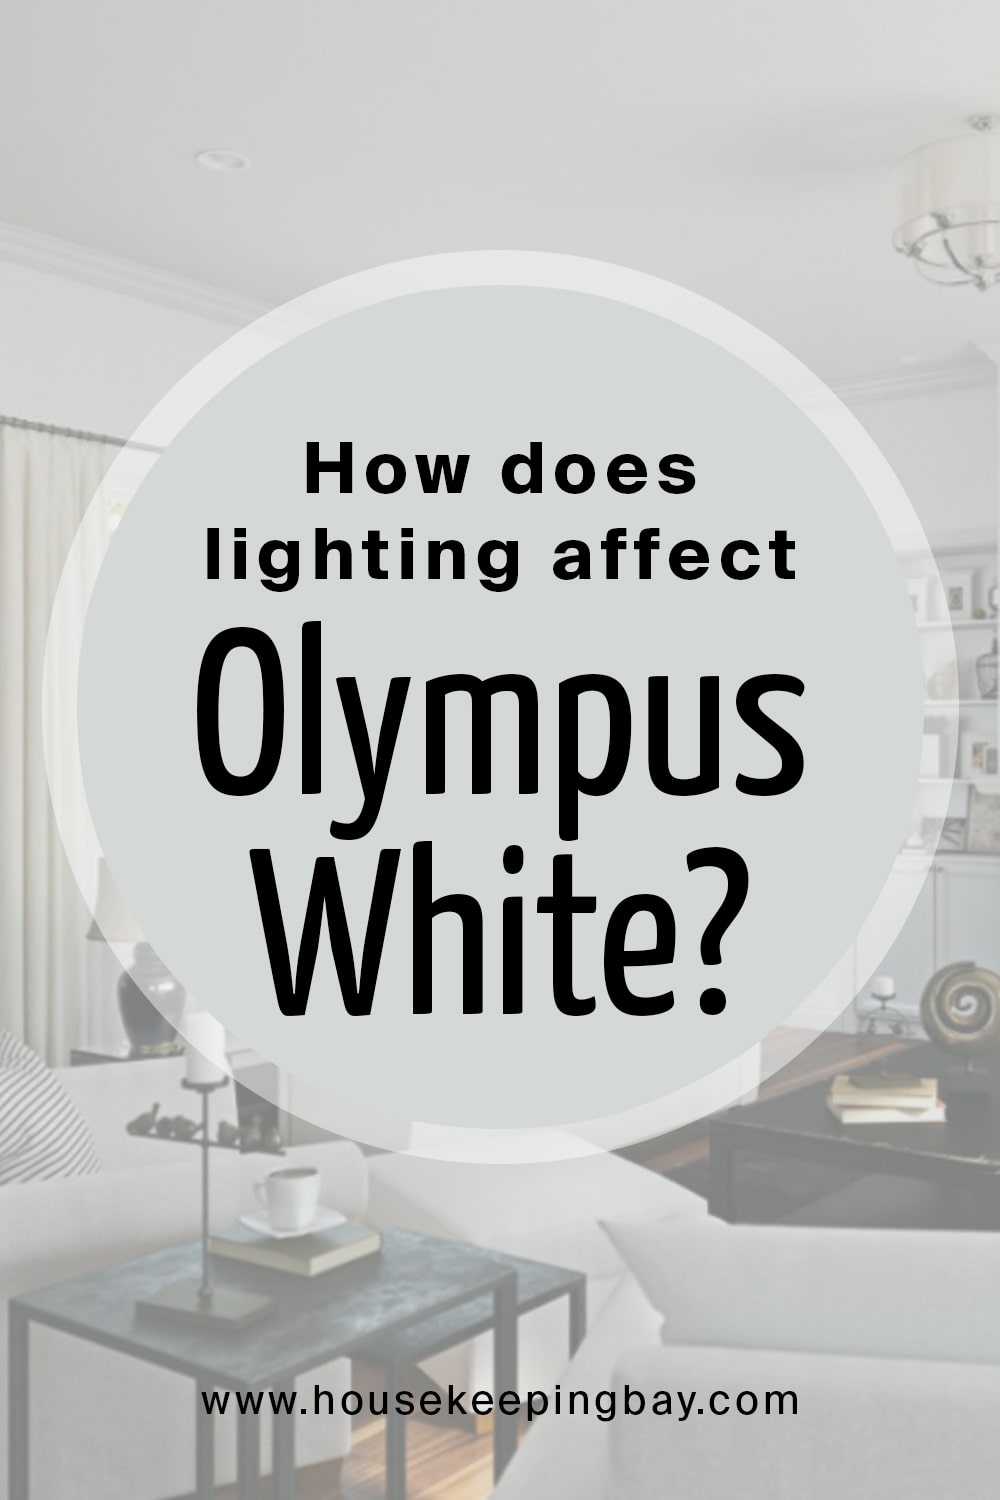 How does lighting affect Olympus White